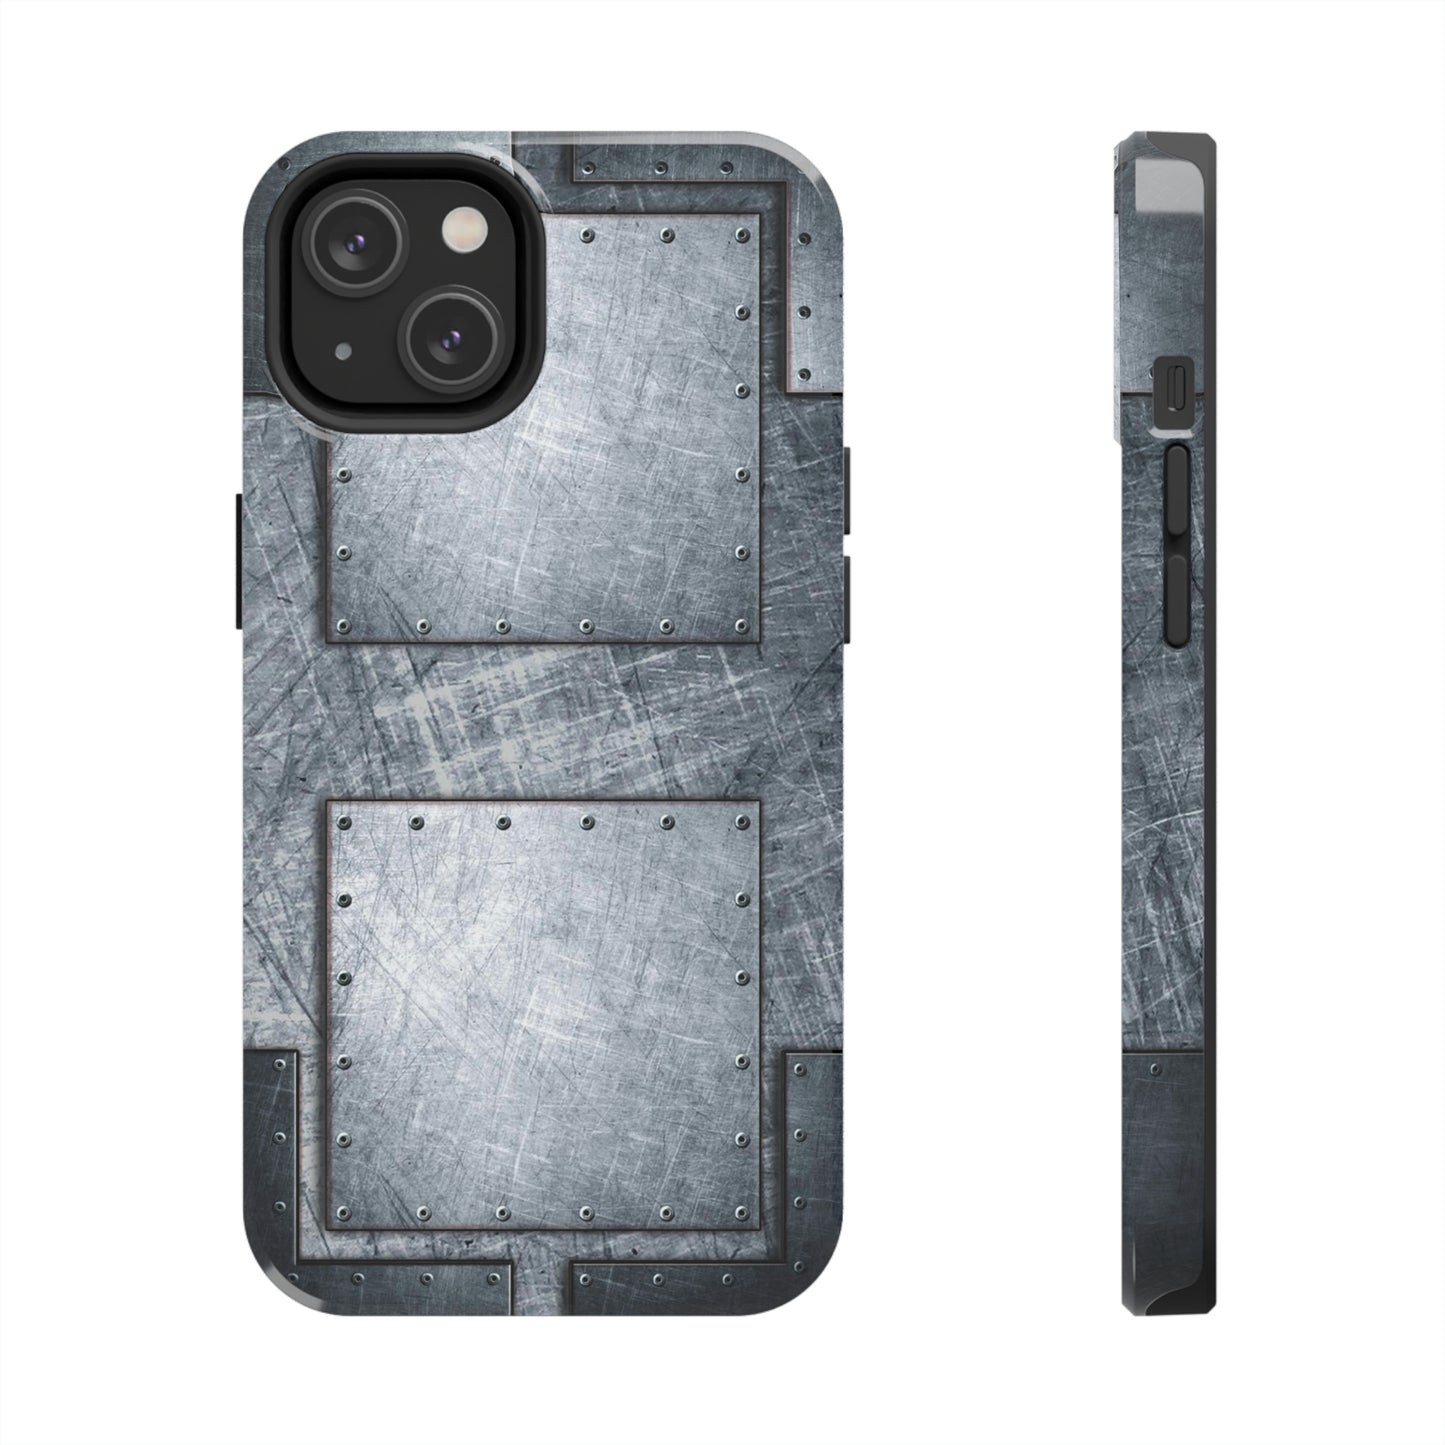 Steampunk Industrial Themed Tough Case for iPhone 14 - Distressed, Riveted Metal Plates Print Phone Case